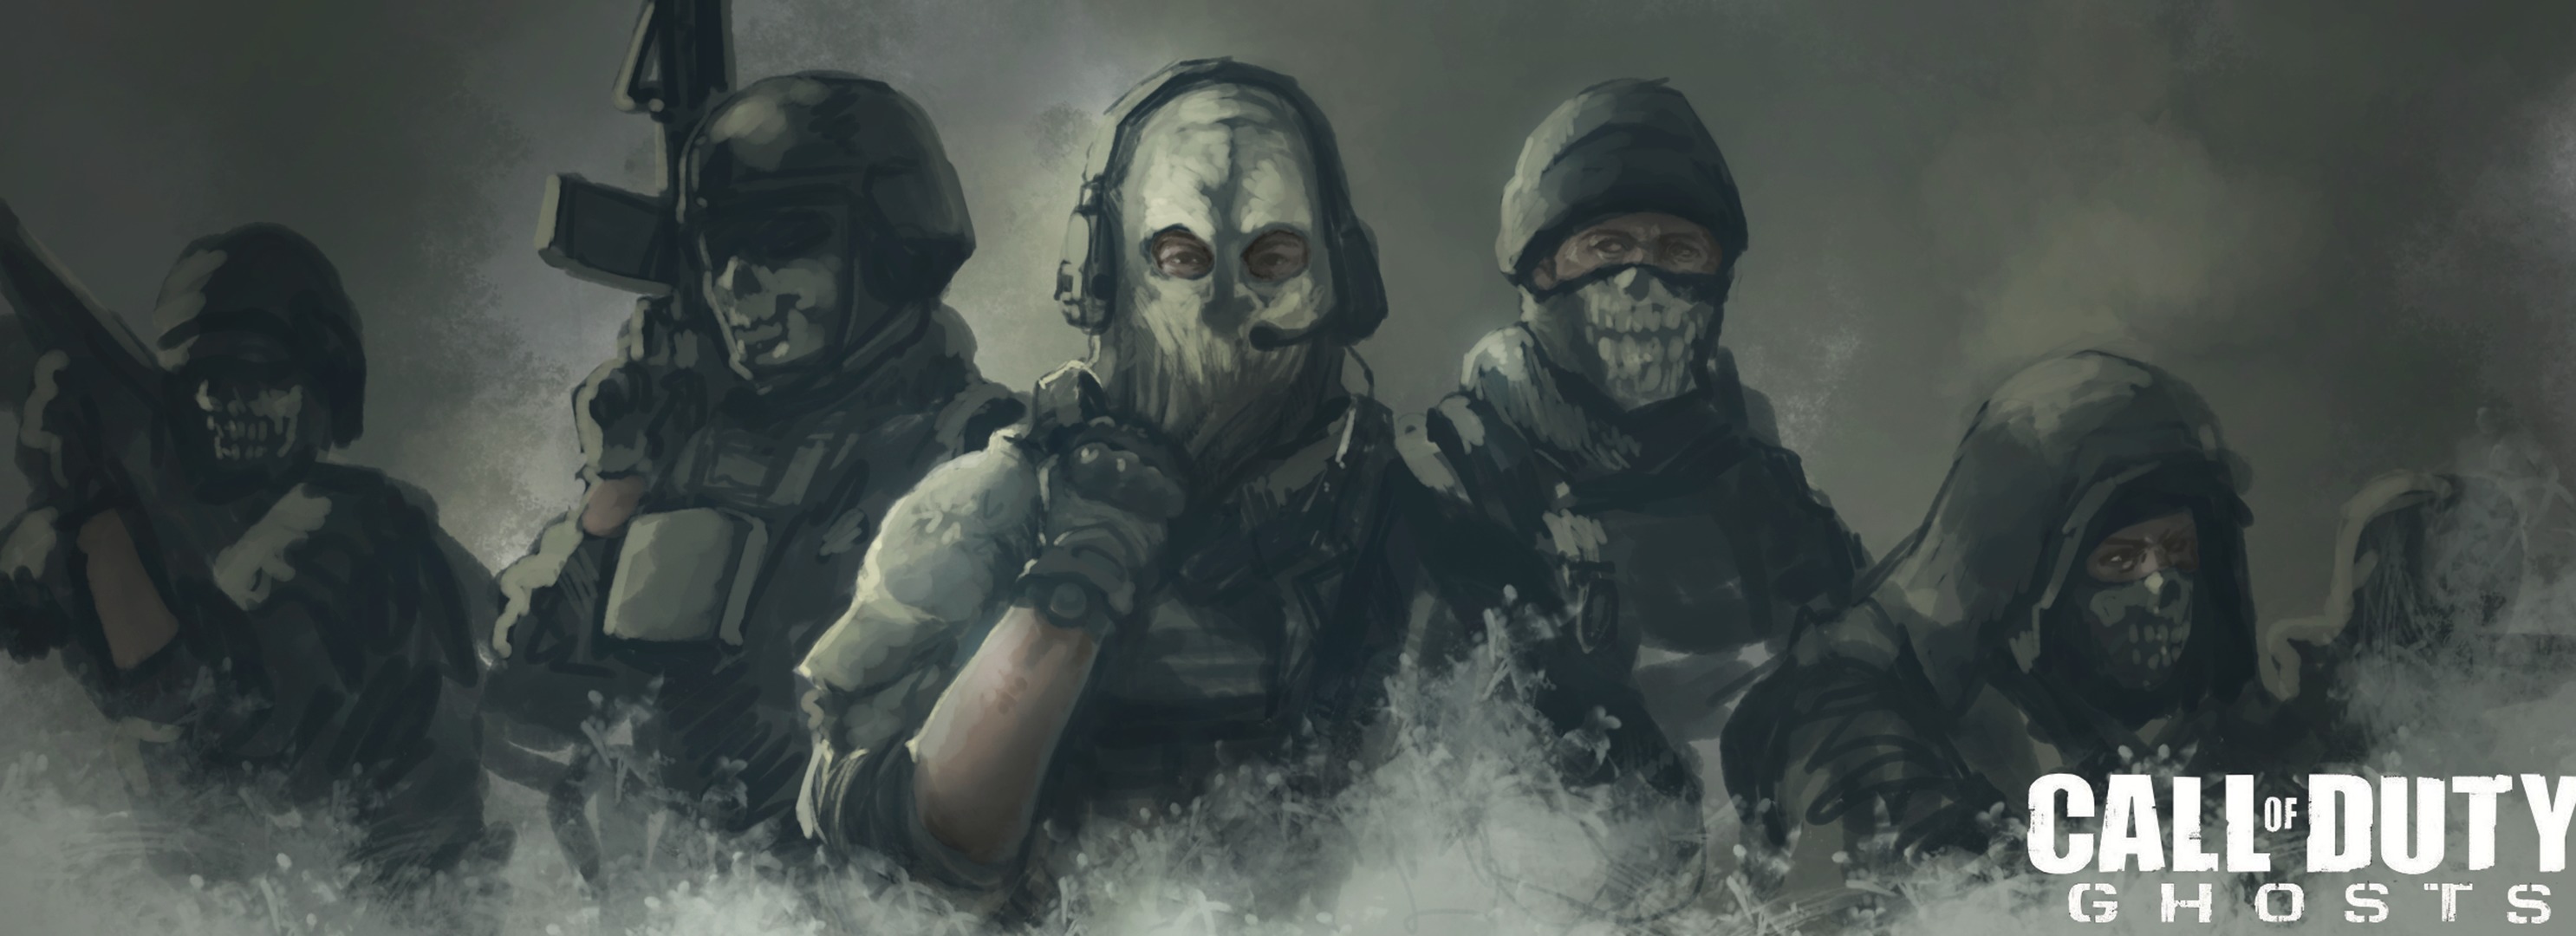 Call Of Duty Ghosts Soldier 2972x1080